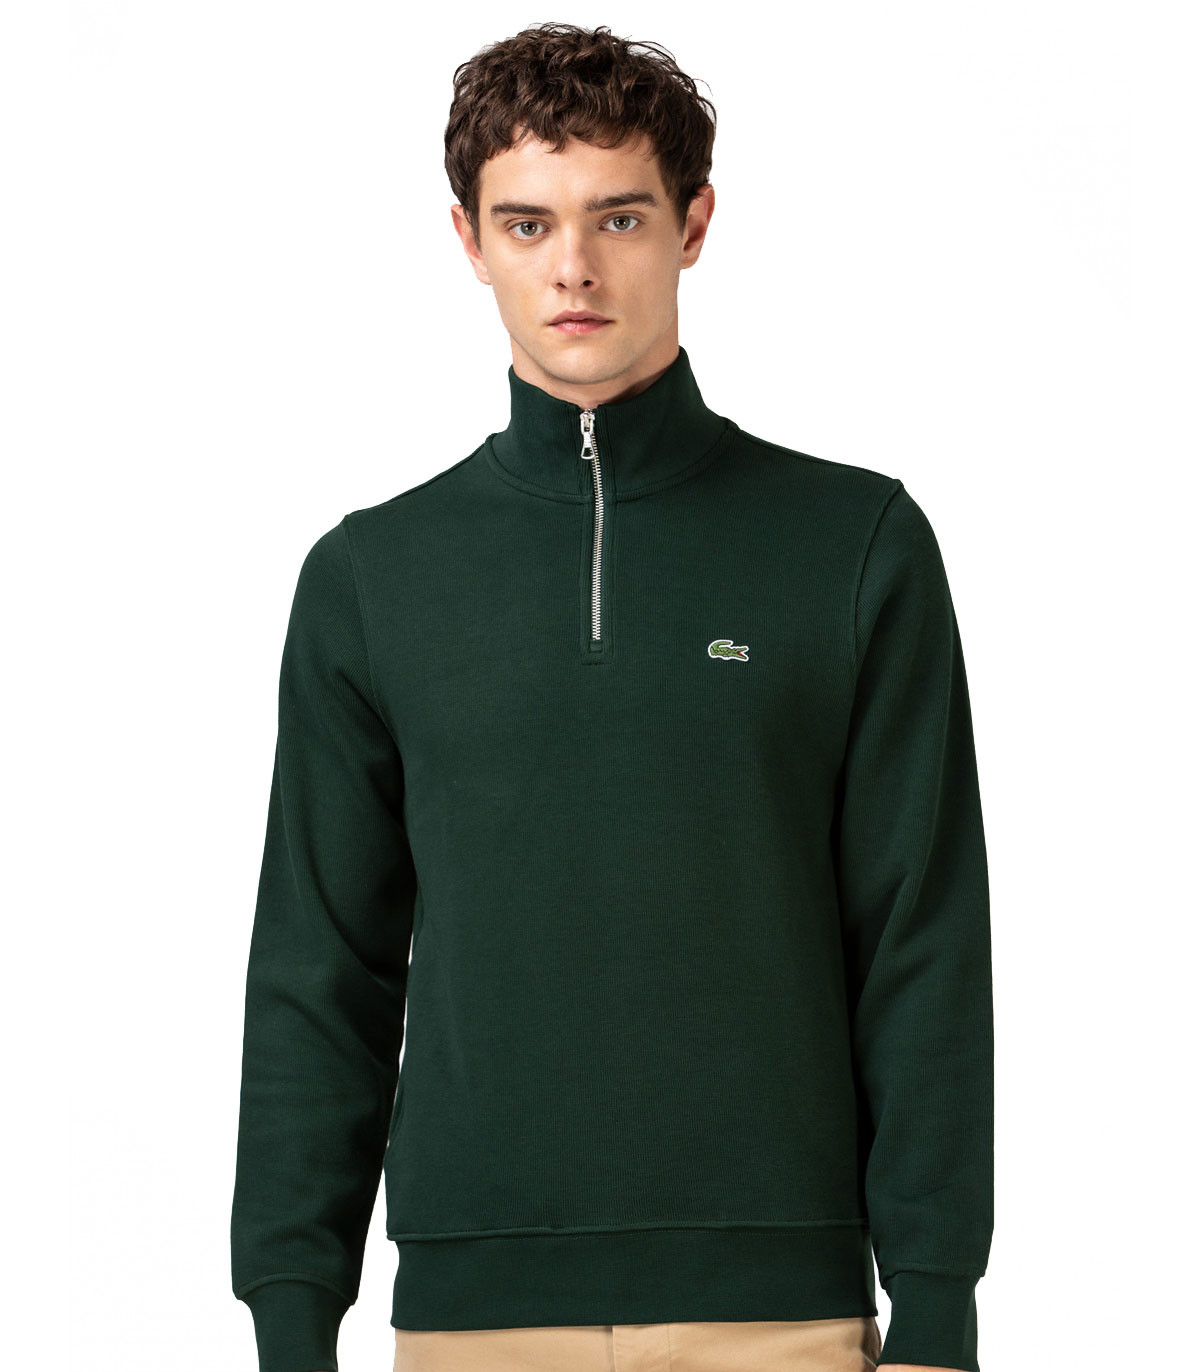 Lacoste - Sudadera Hombre Verde - Stand-up